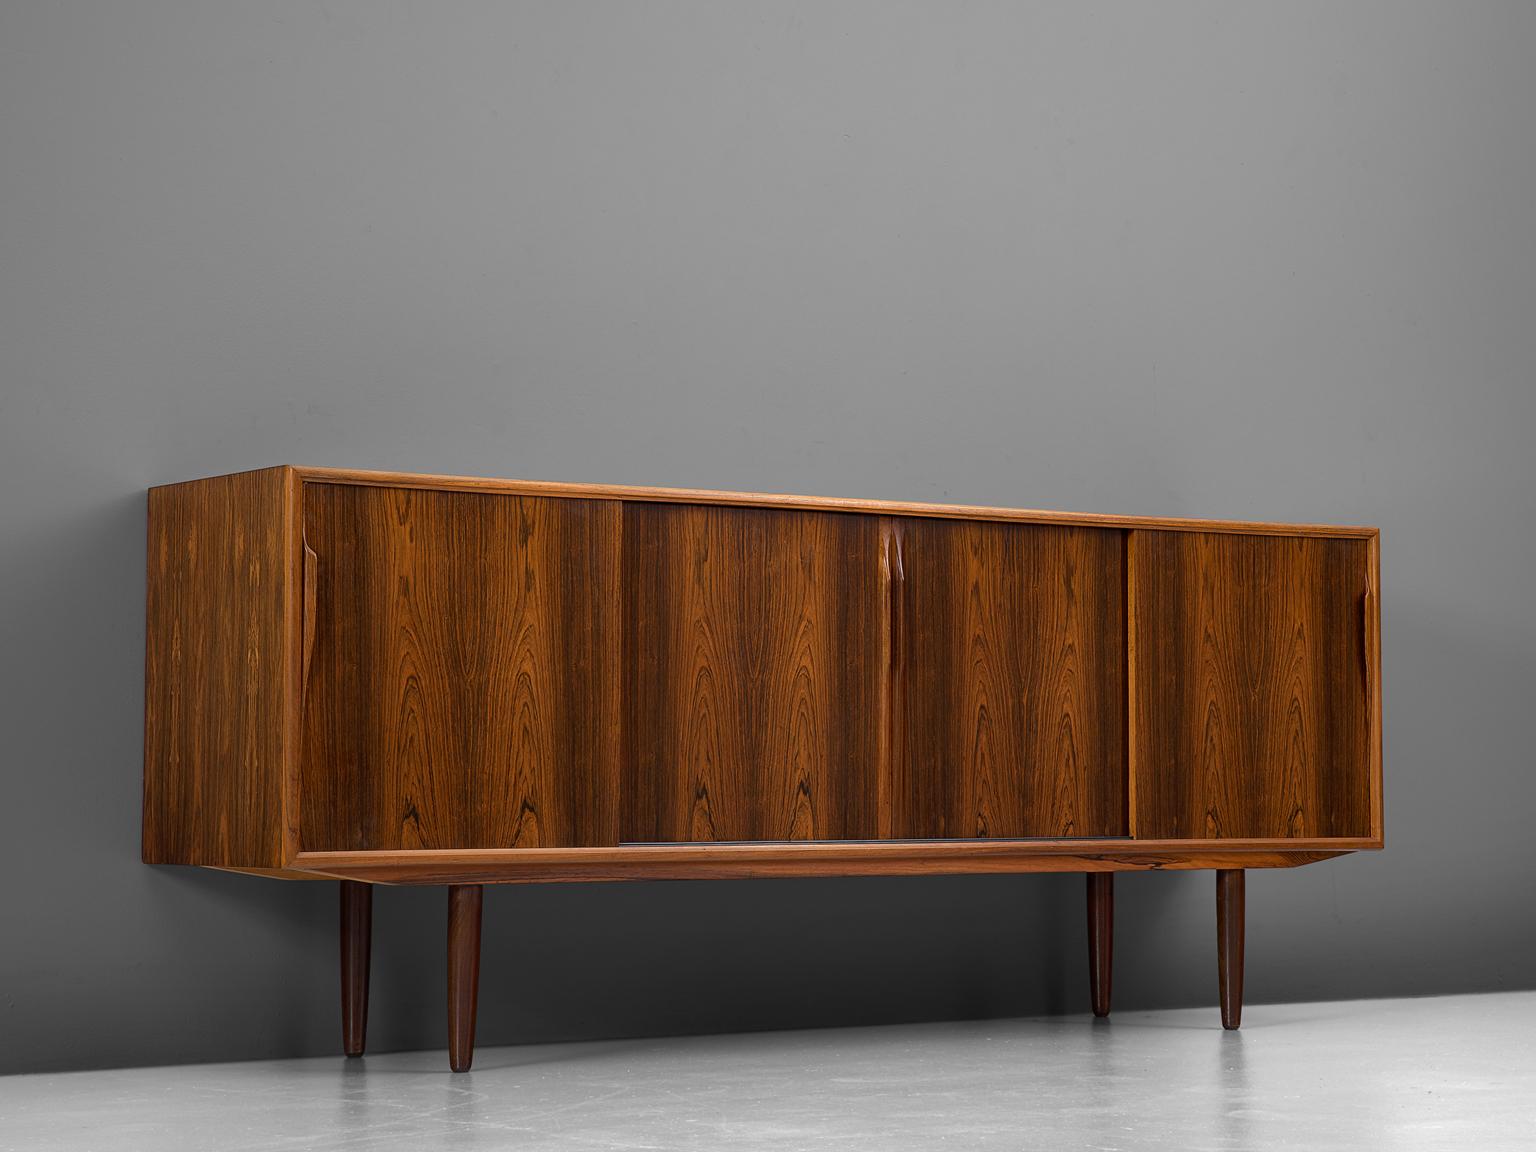 Sideboard, in rosewood, Denmark, 1960s.

This highly refined credenza has a modest and well proportioned design, showing extraordinary rosewood veneer. The four sliding doors have an interesting mirrored pattern of a lively grain. The contrasting